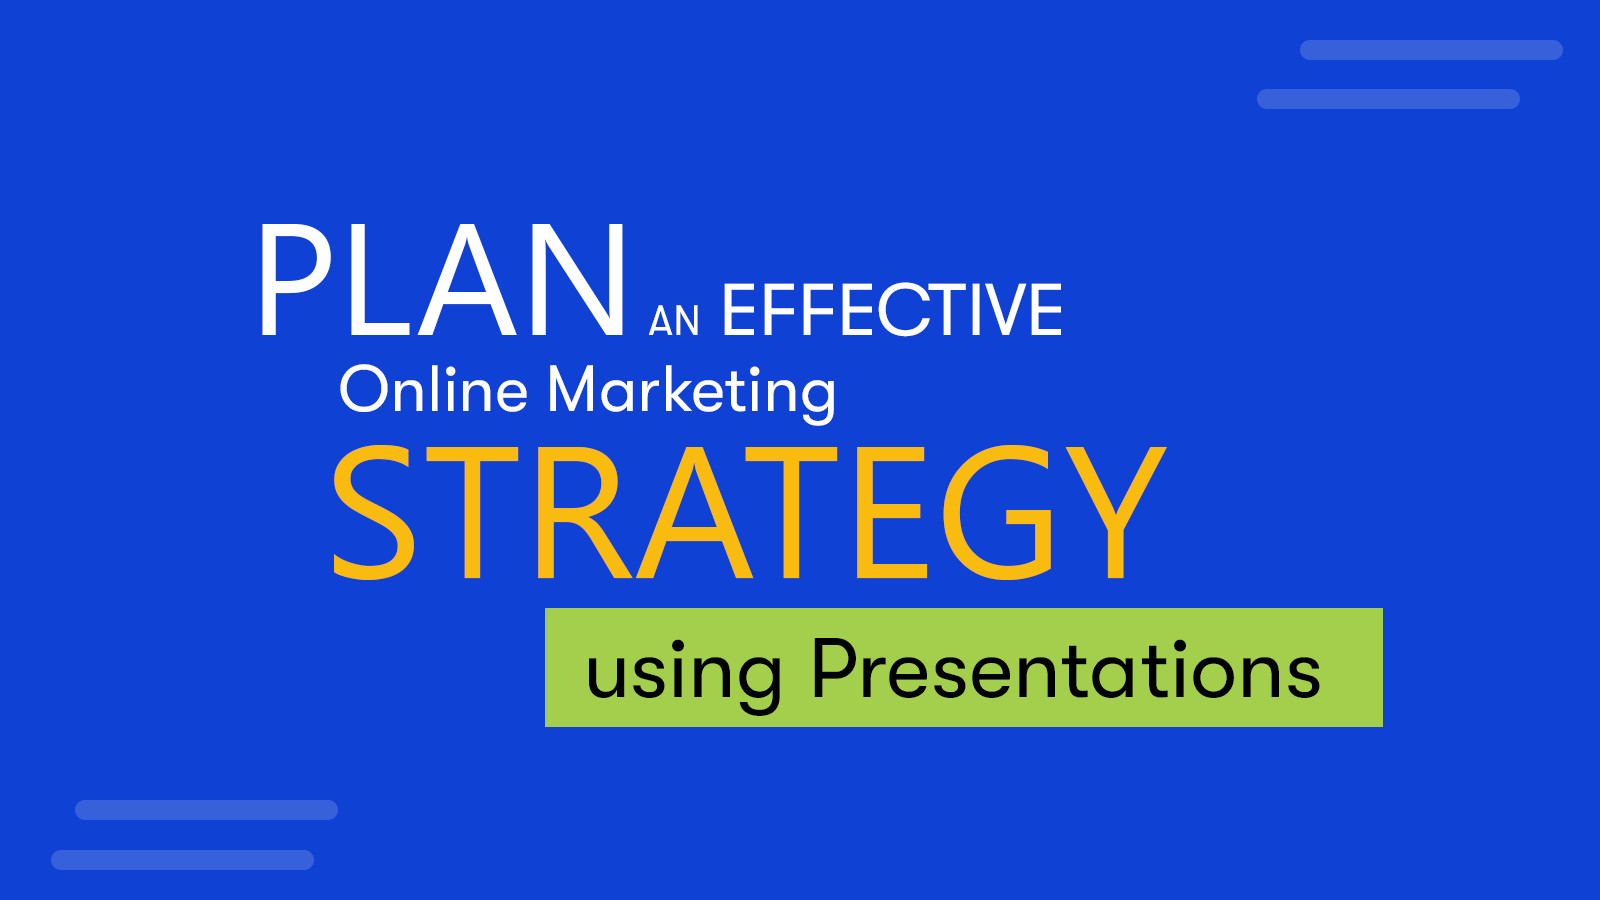 How To Plan An Effective Online Marketing Strategy Using PowerPoint Presentations